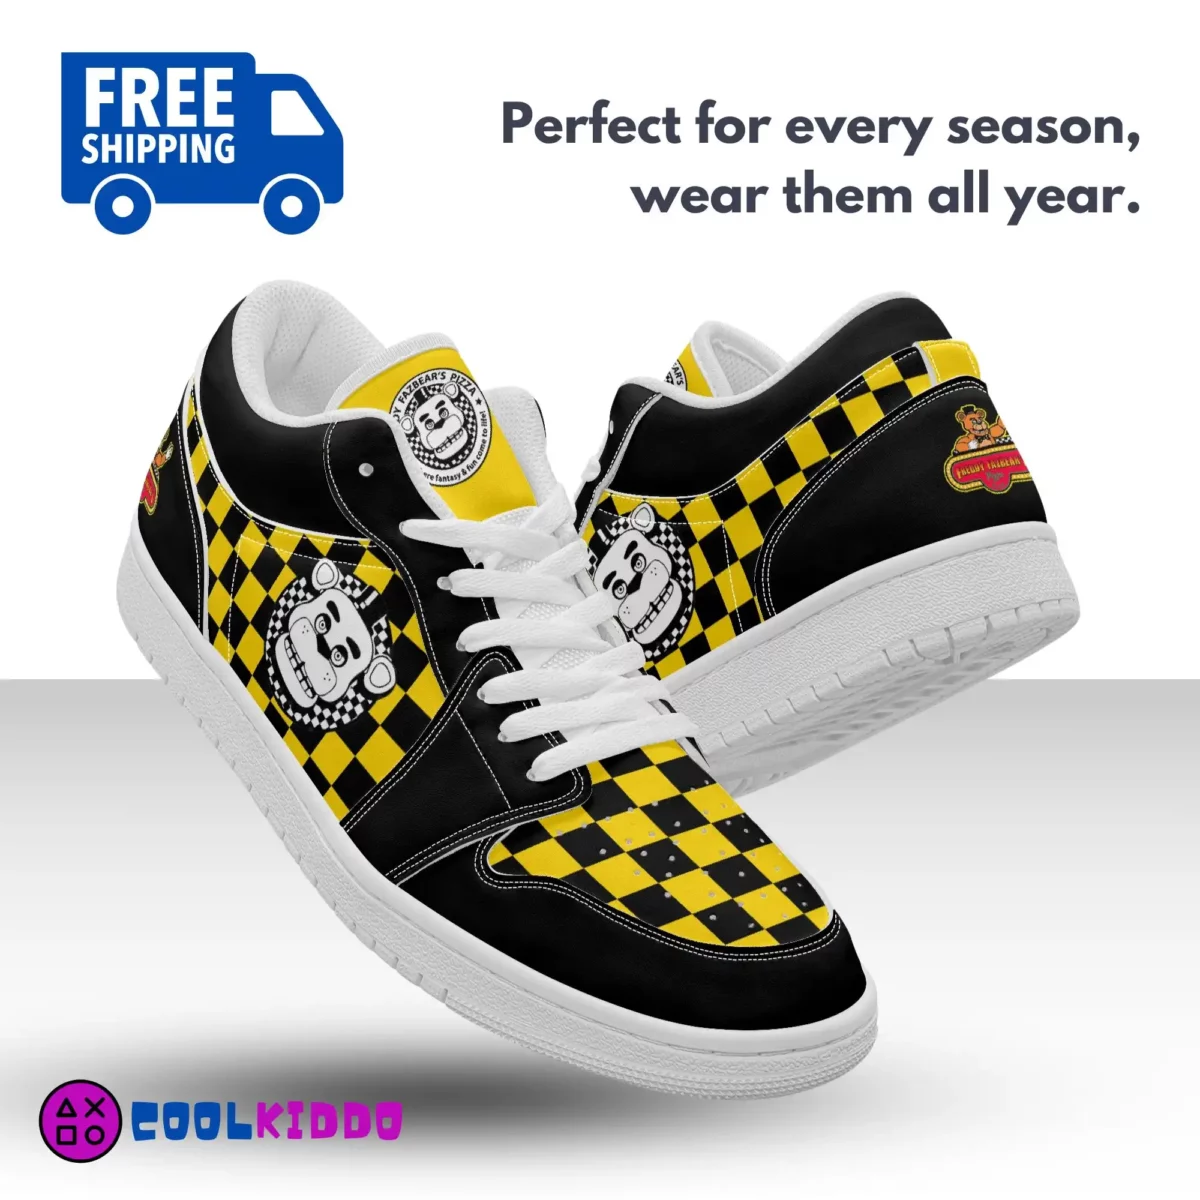 FNAF Five Nights at Freddy’s Video Game Shoes Inspired Low-Top Leather Sneakers for youth / adults Cool Kiddo 12